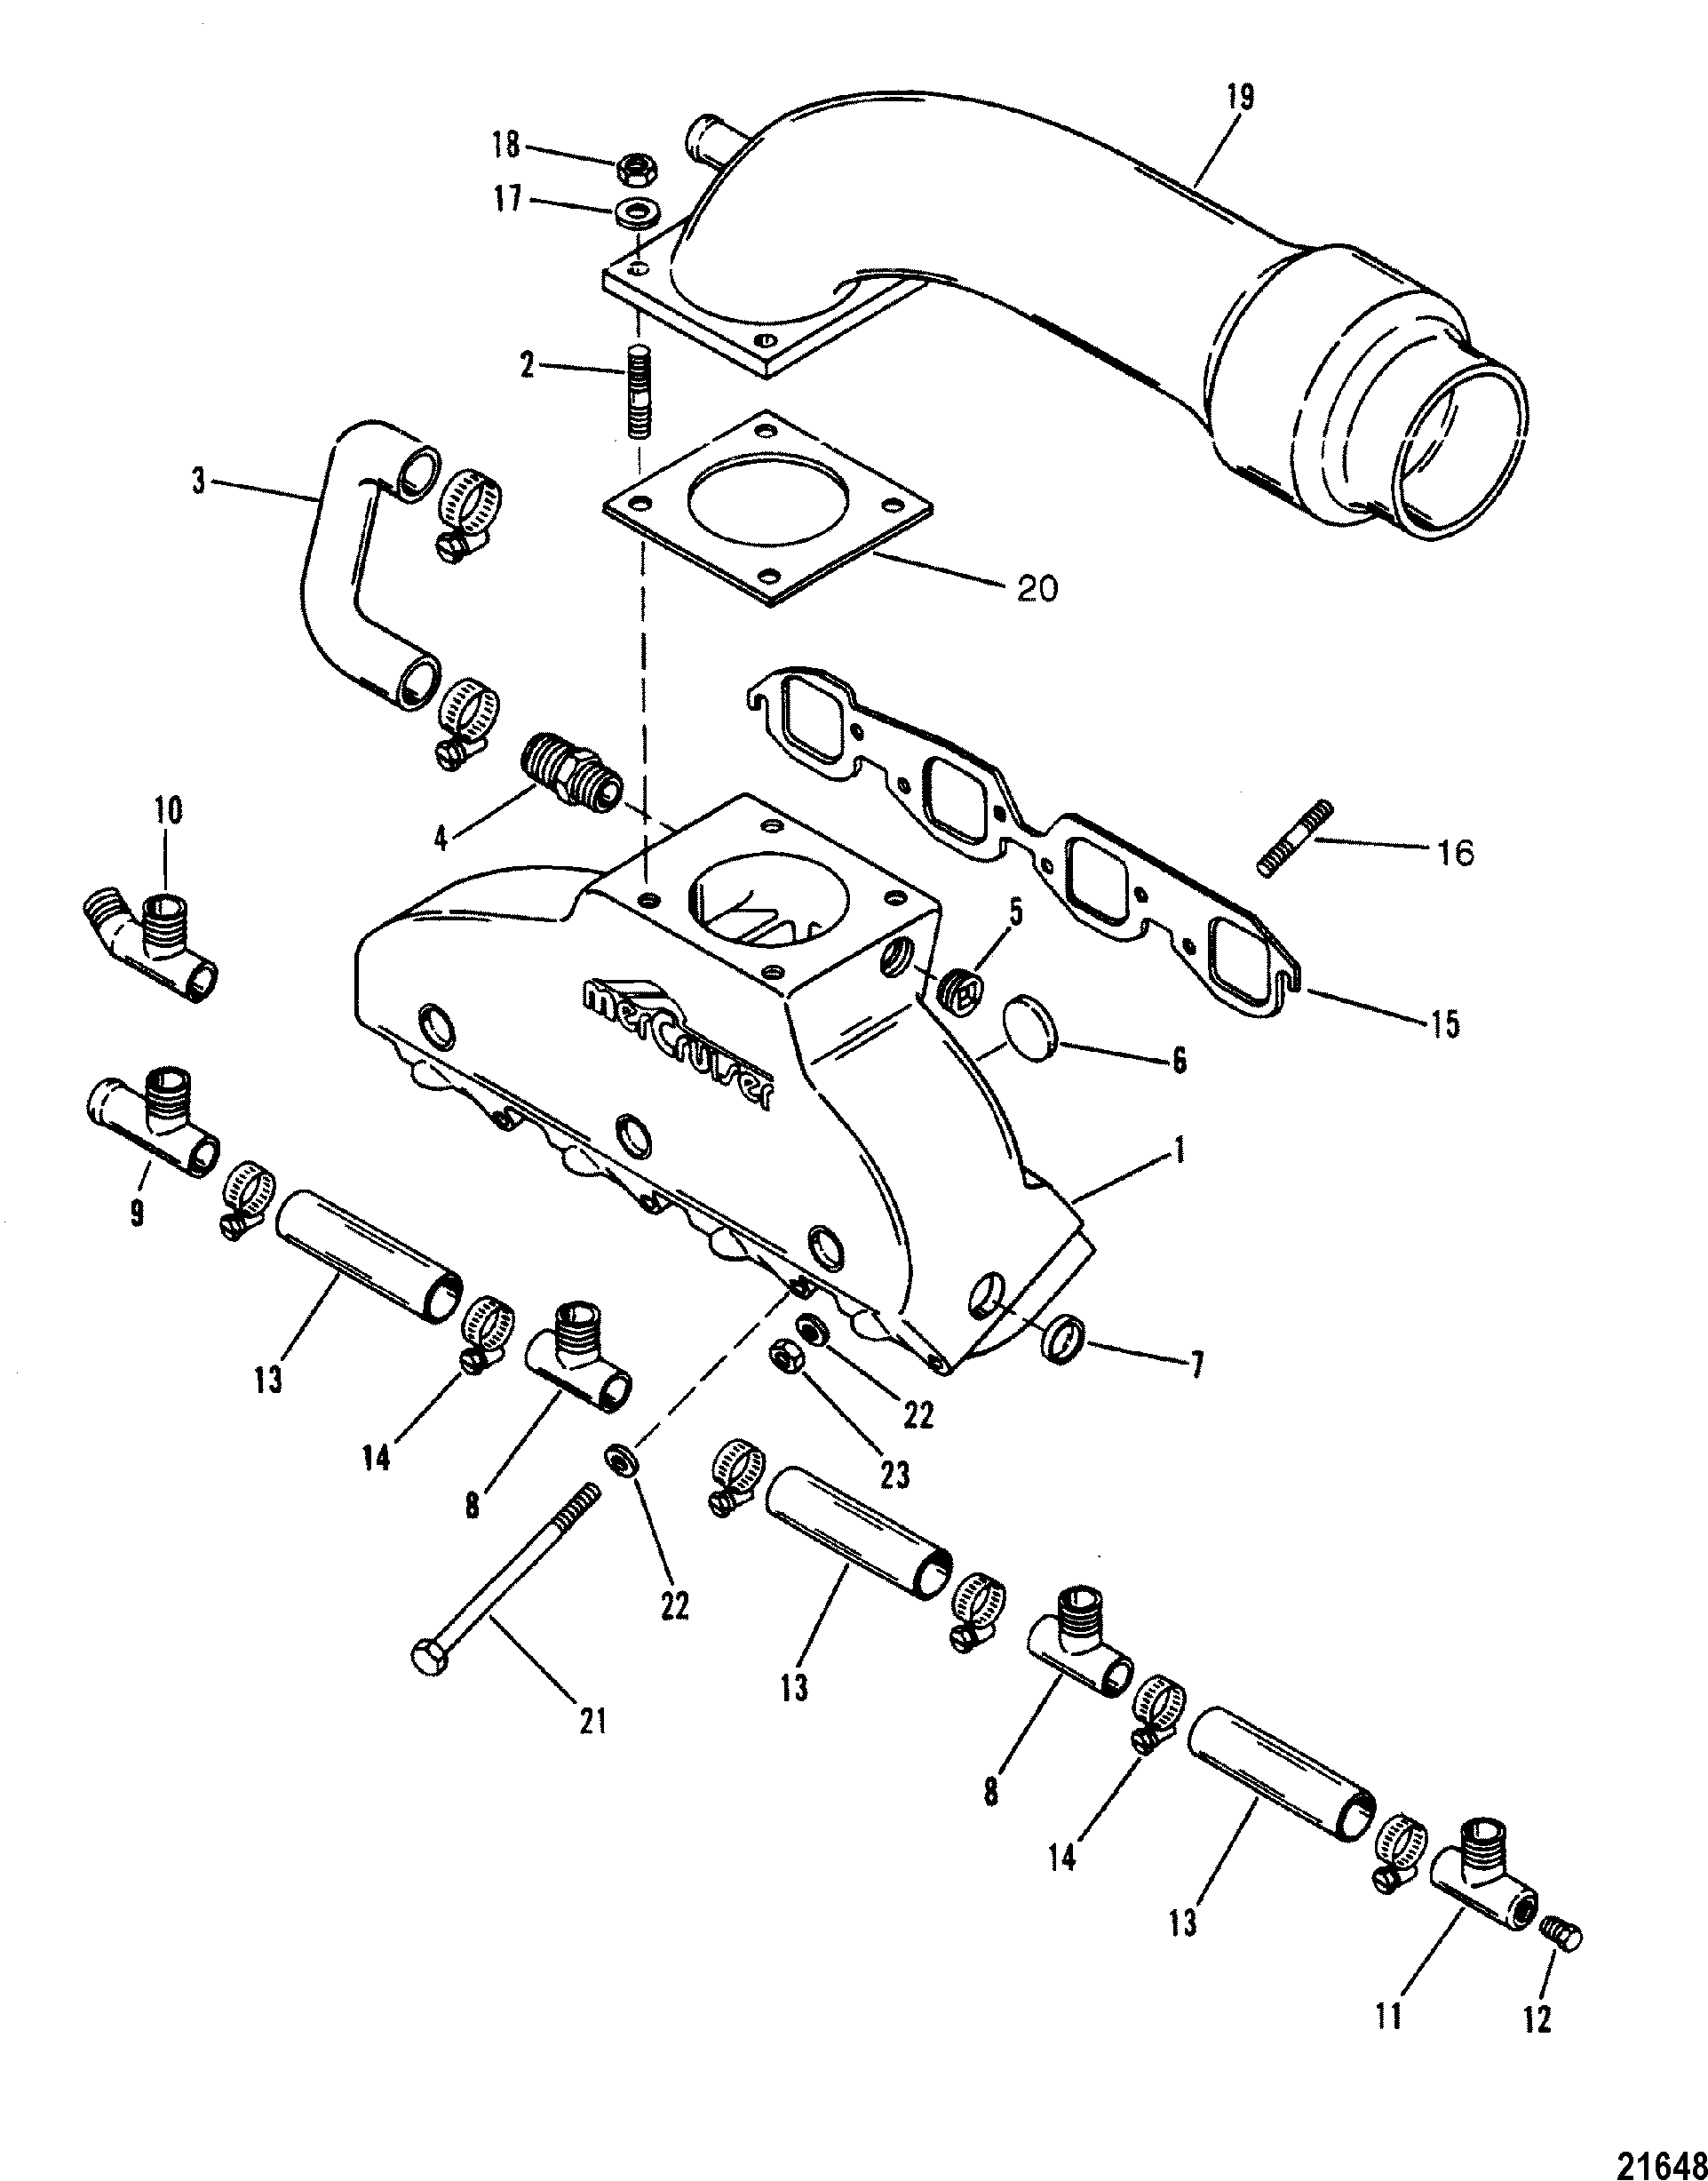 Exhaust Manifold / Elbow(420 GIL System)